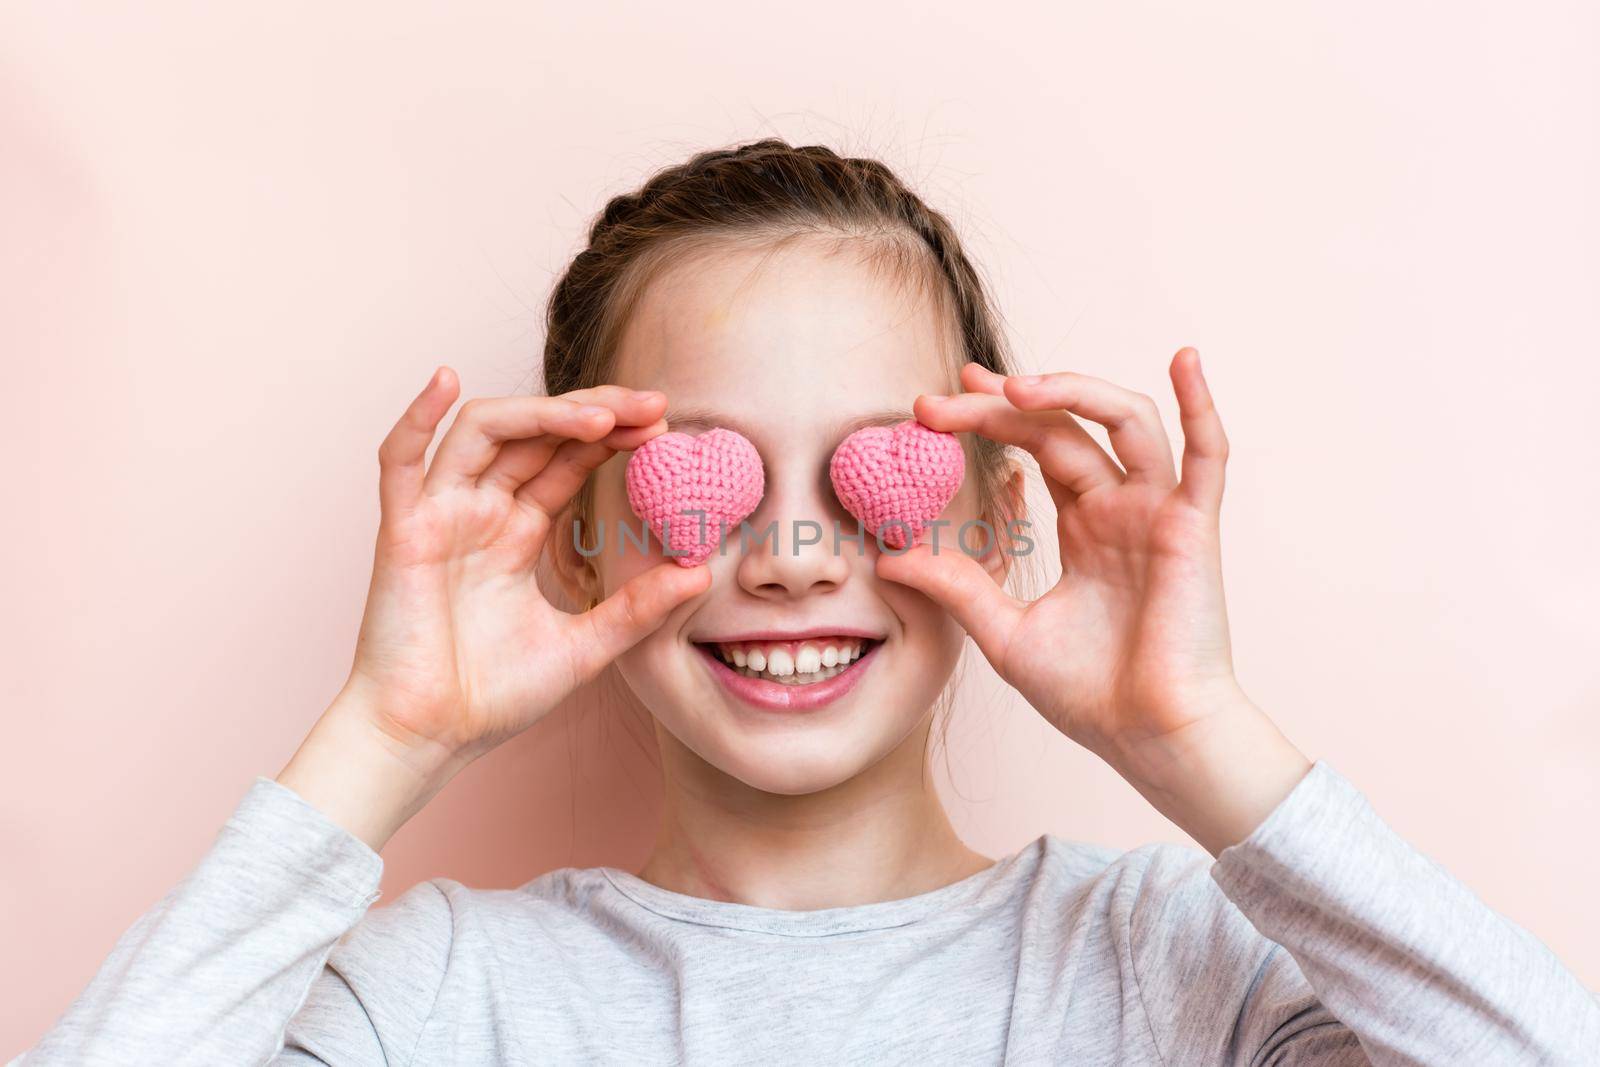 Cheerful smiling girl holding knitted hearts in front of her eyes